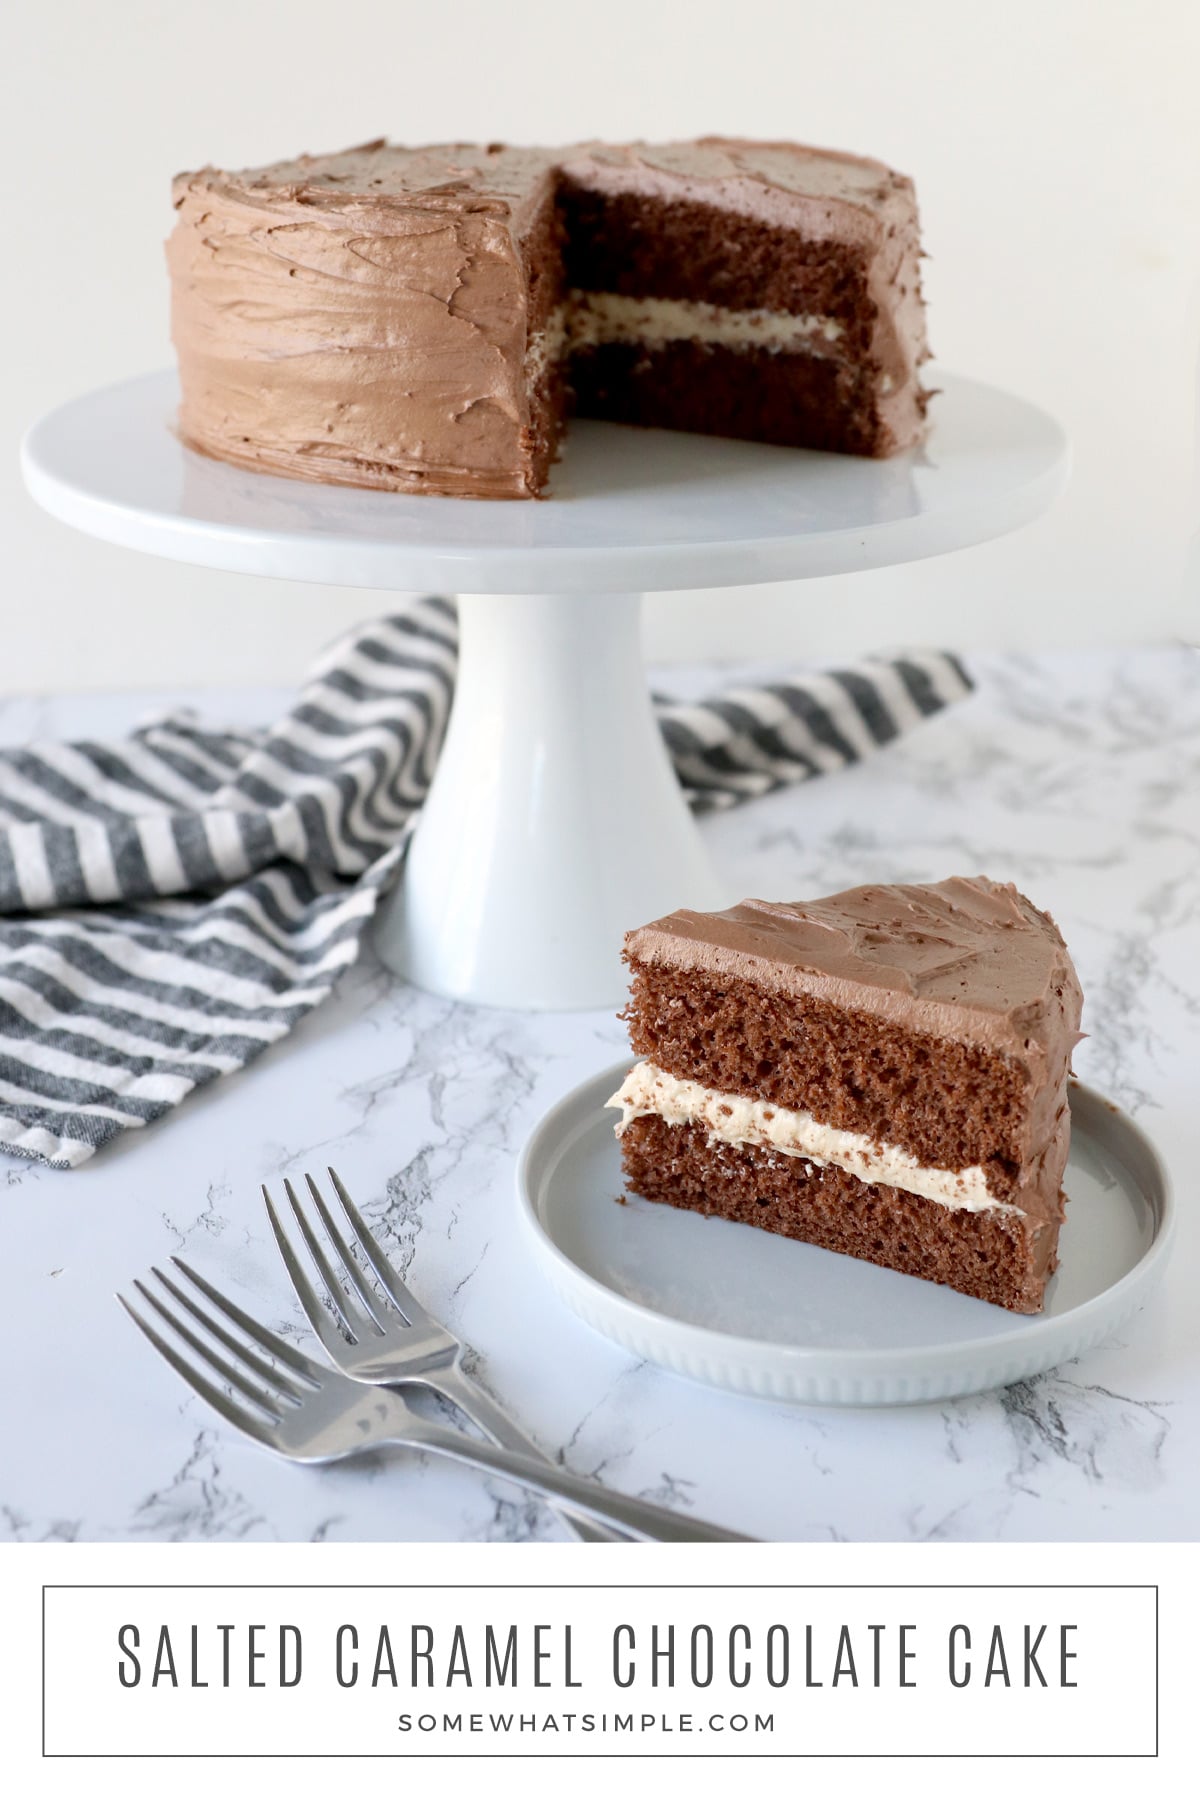 Fluffy chocolate cake and creamy salted caramel frosting - this Salted Caramel Chocolate Cake is perfectly delicious and totally easy to make! via @somewhatsimple